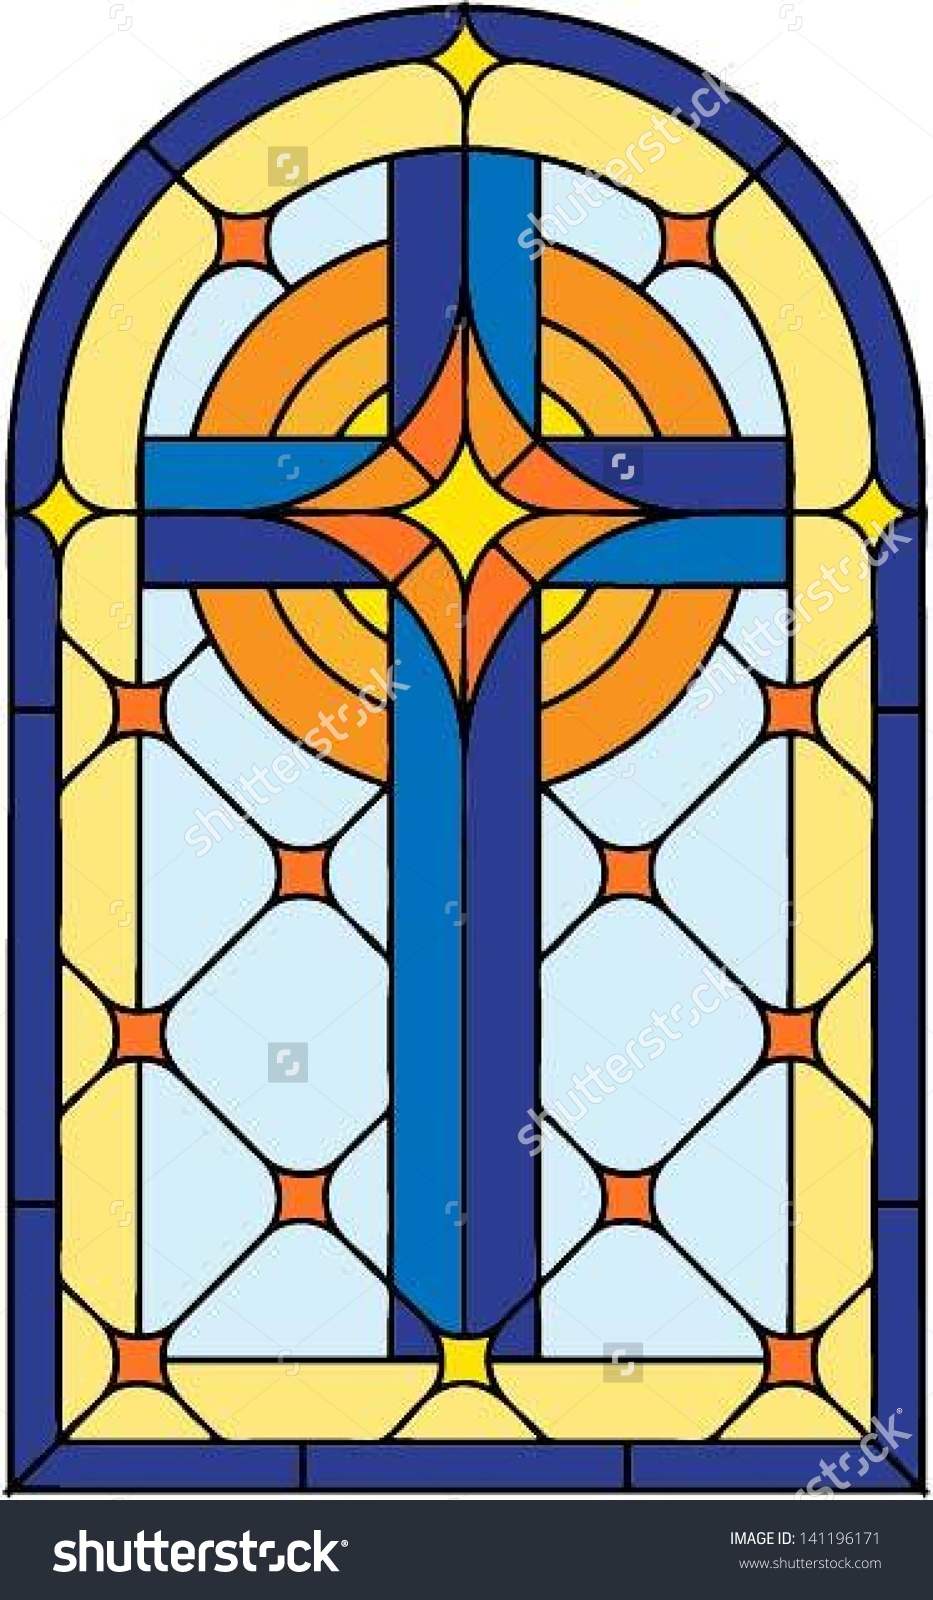 stained glass window clipart free - photo #13